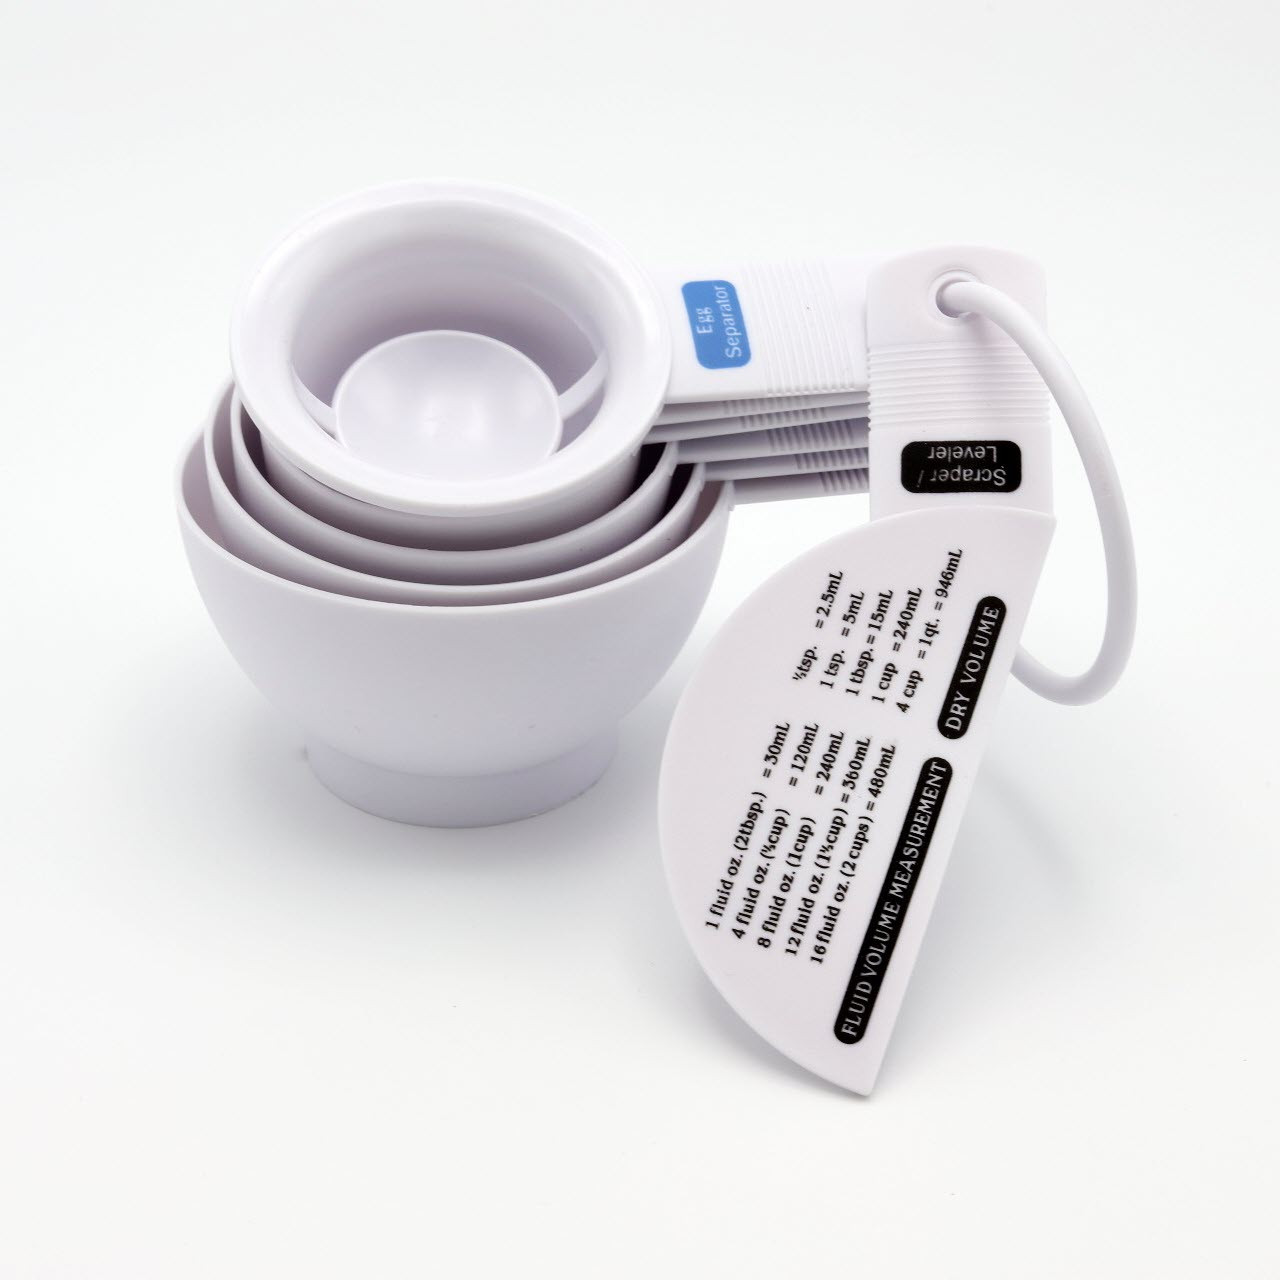 https://cdn11.bigcommerce.com/s-21kj3ntgv1/images/stencil/1280x1280/products/145/1634/7-piece-Measuring-cup-set-with-egg-separator__38192.1616964511.jpg?c=2